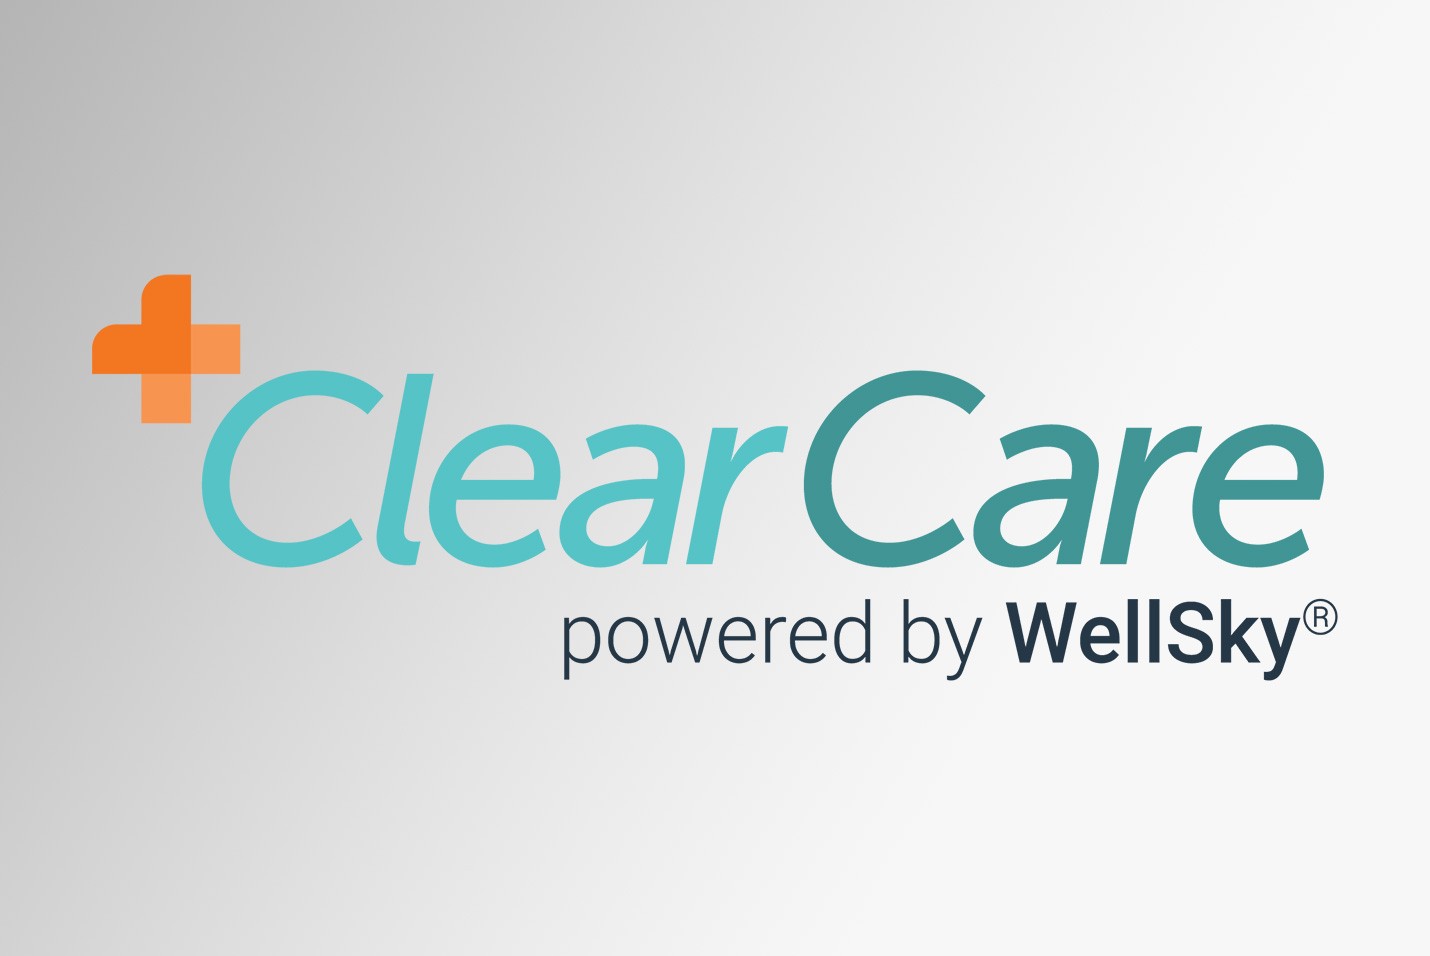 Always Best Care selects ClearCare, now offers tech to clients & caregivers nationwide